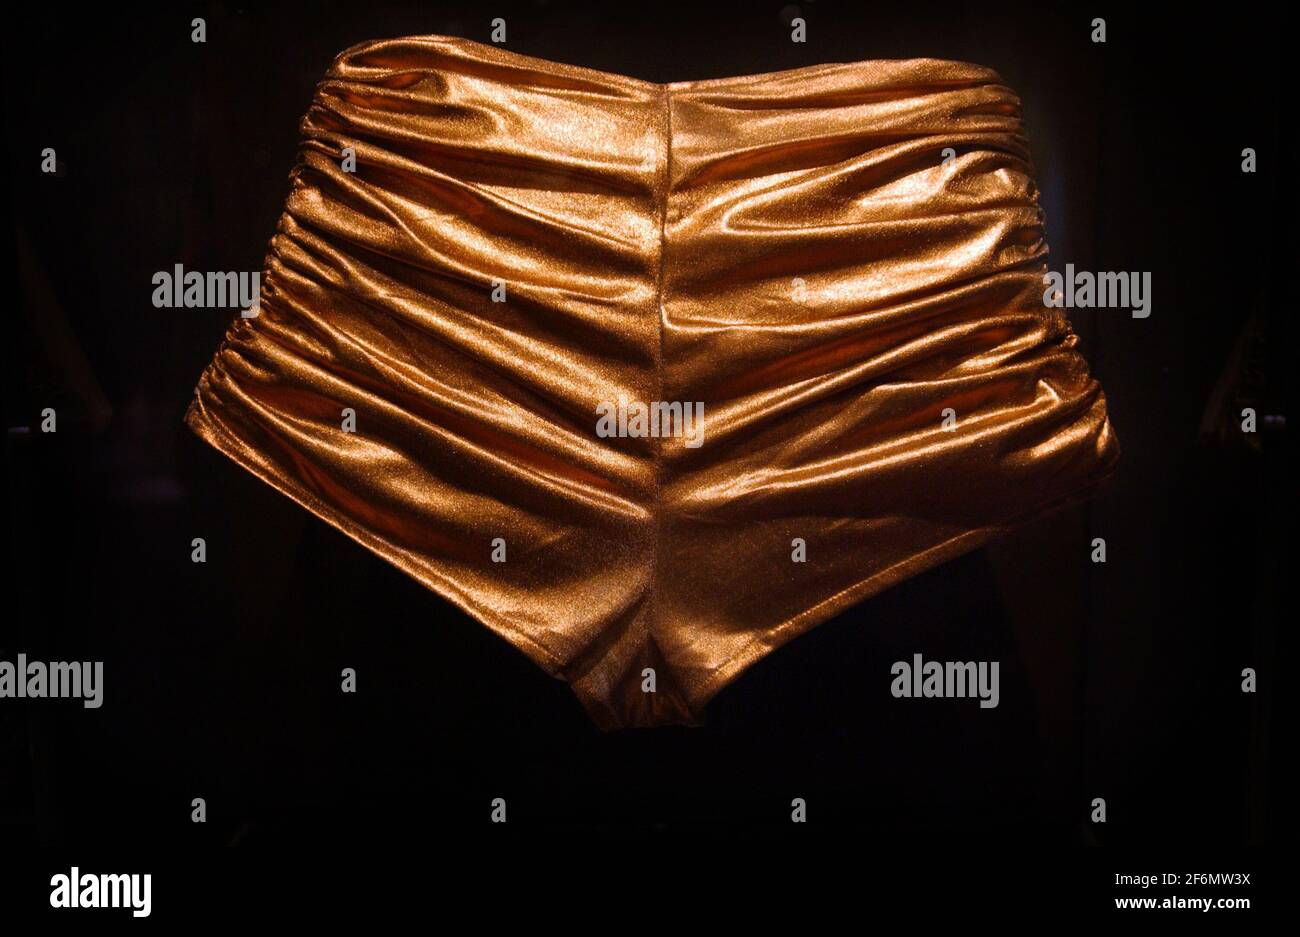 PRESS VIEW OF KYLIE MINOGUE AT THE V&A, GOLD LAME HOT PANTS .6 February 2007 PHOTO TOM PILSTON Stock Photo